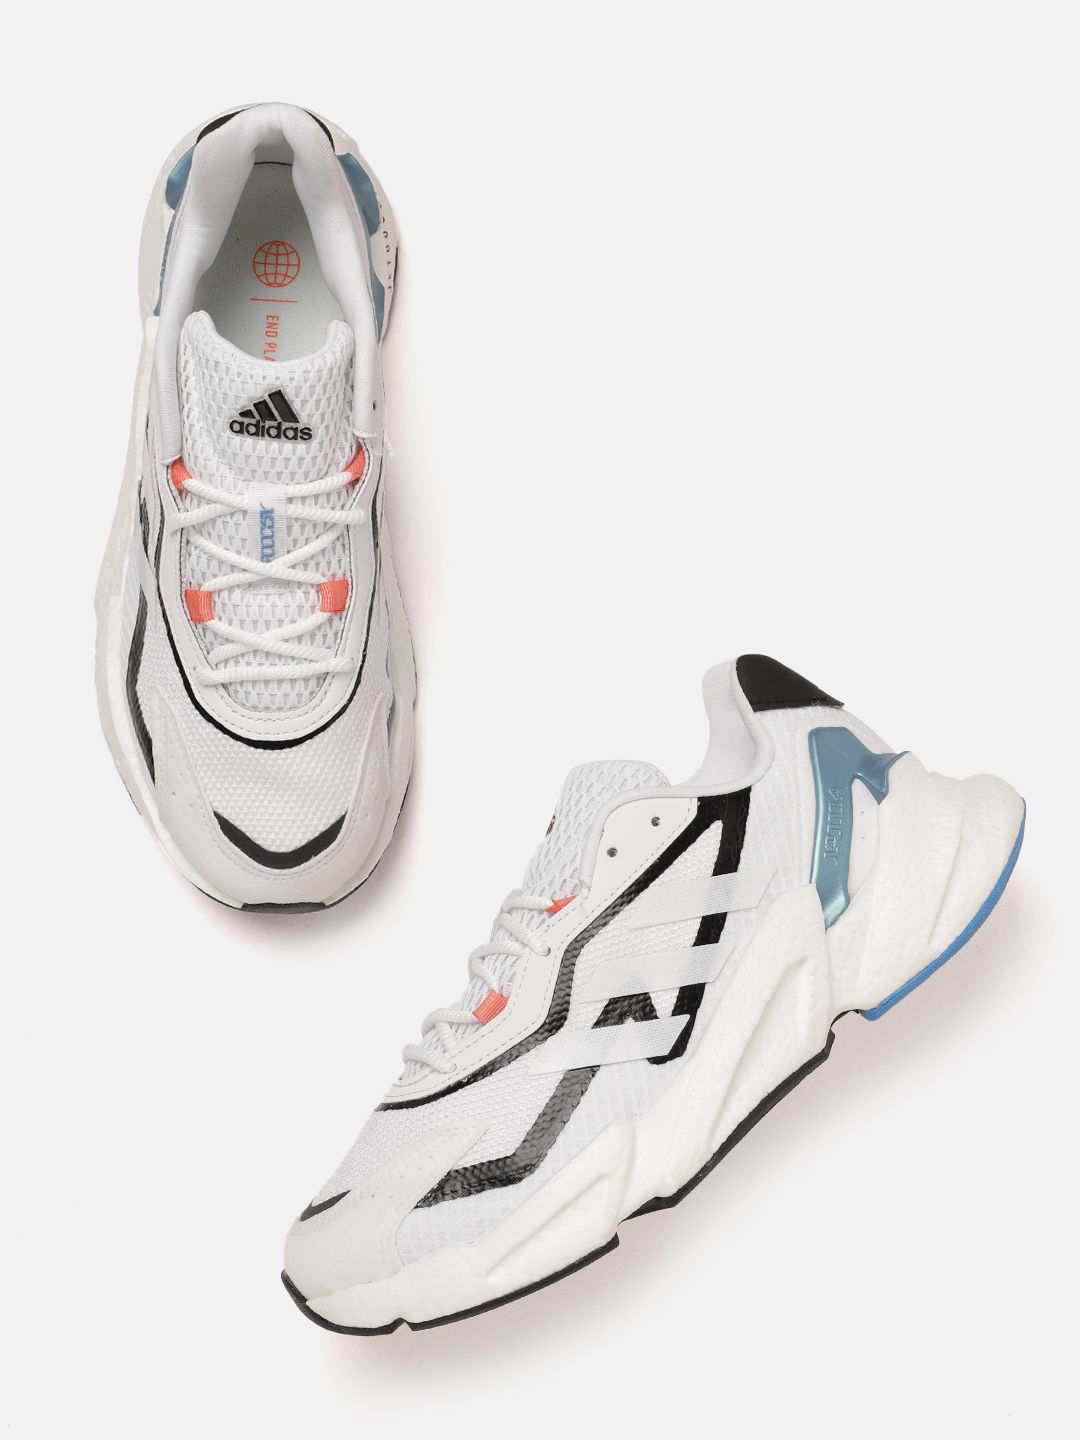 ADIDAS Unisex White Textile Running Shoes Price in India